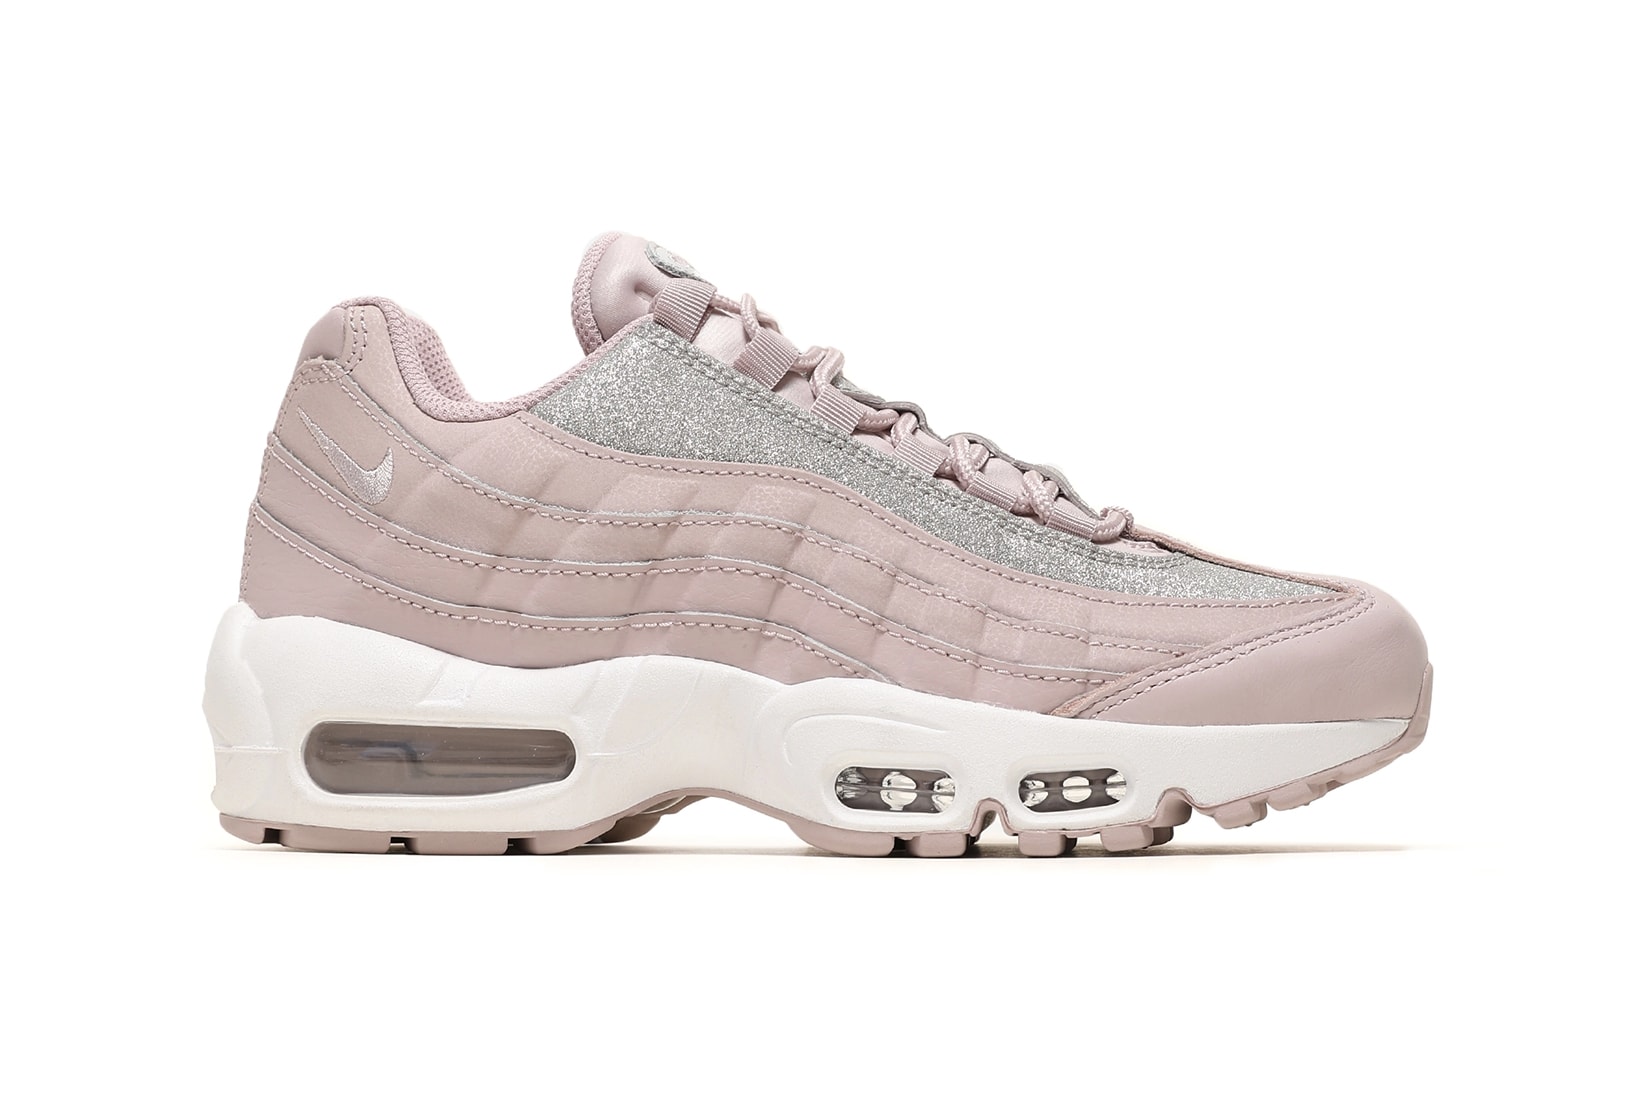 Nike Air Max 95 SE Particle Rose Pink Metallic Silver Glitter Women's Sneakers